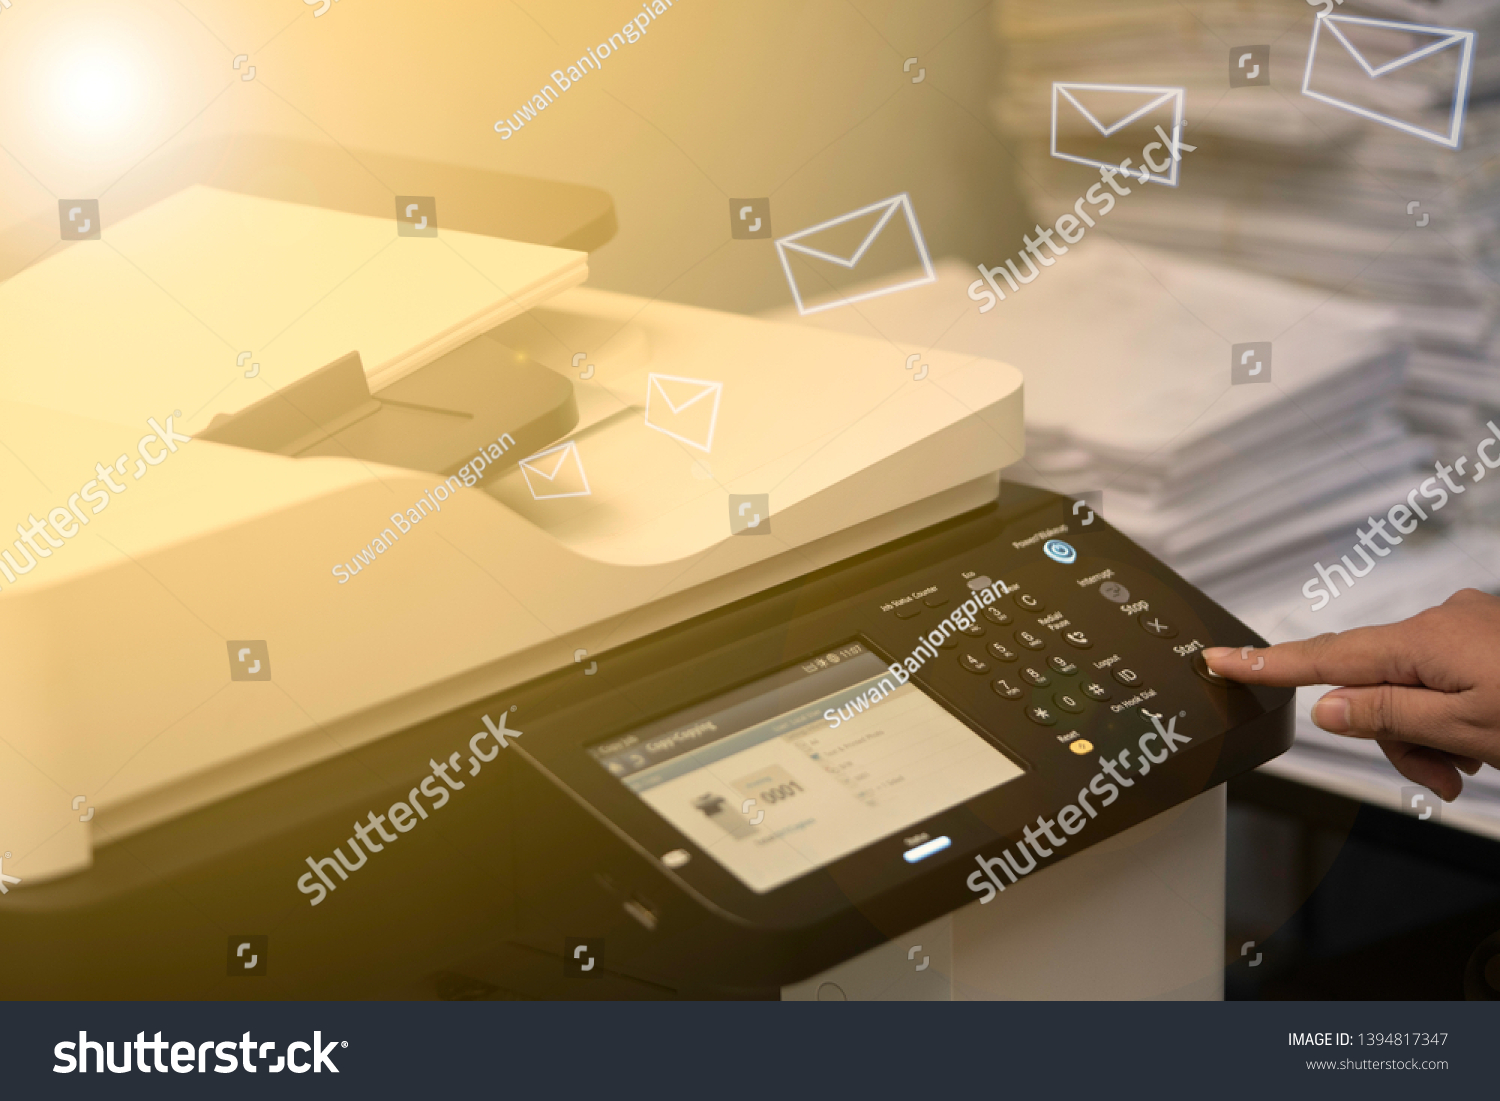 Multifunction machine scanning documents and sending to email. #1394817347